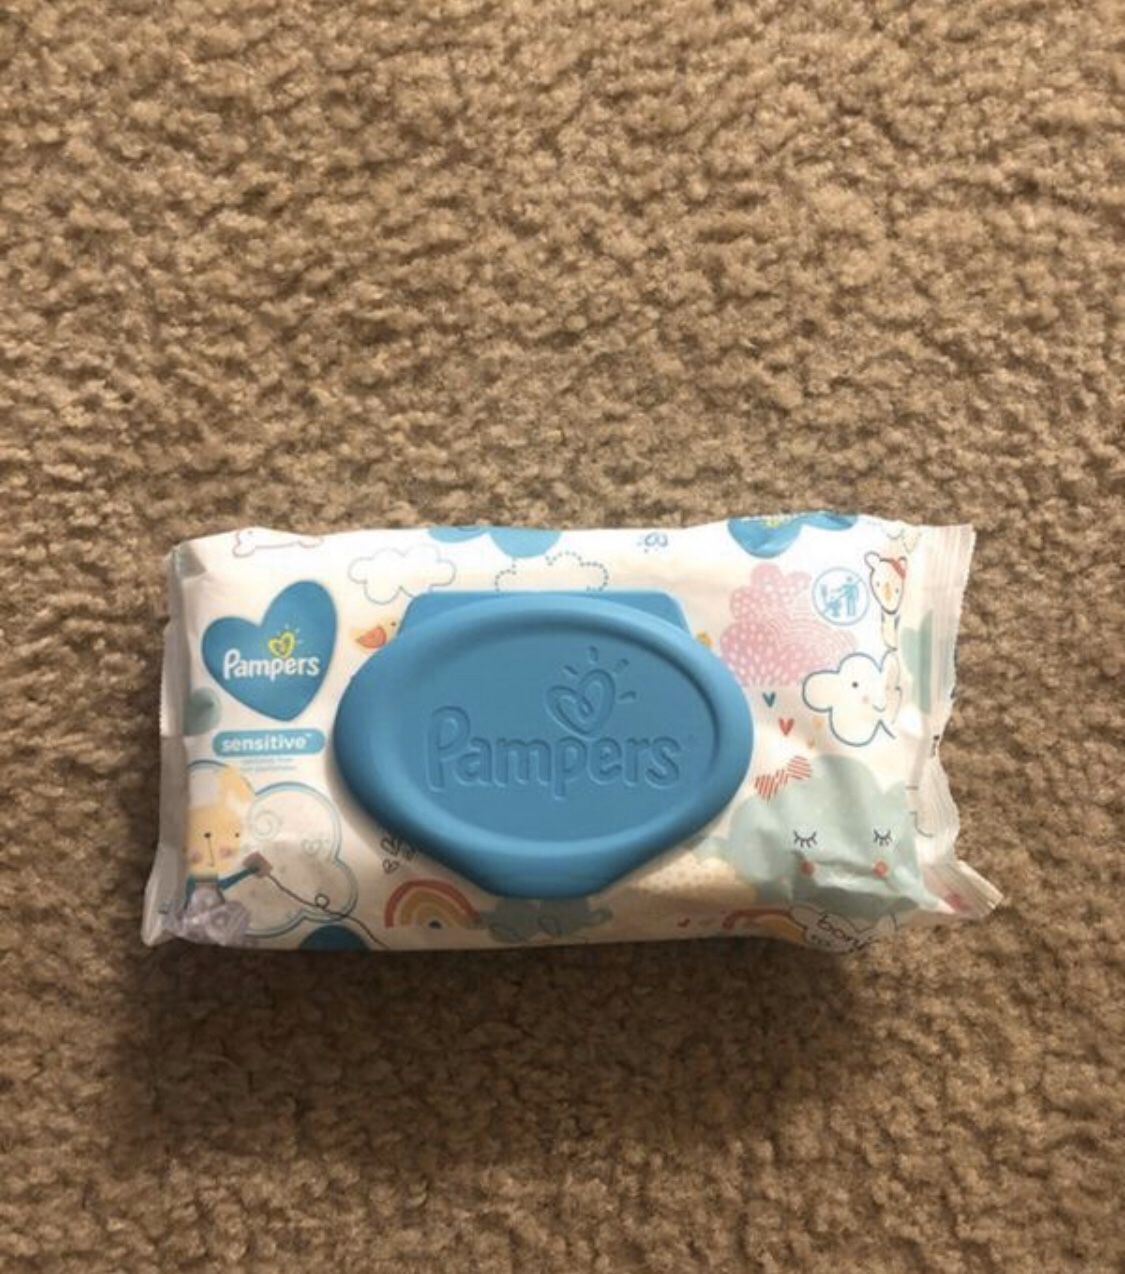 Pampers Baby Wipes Sensitive 56 ct.